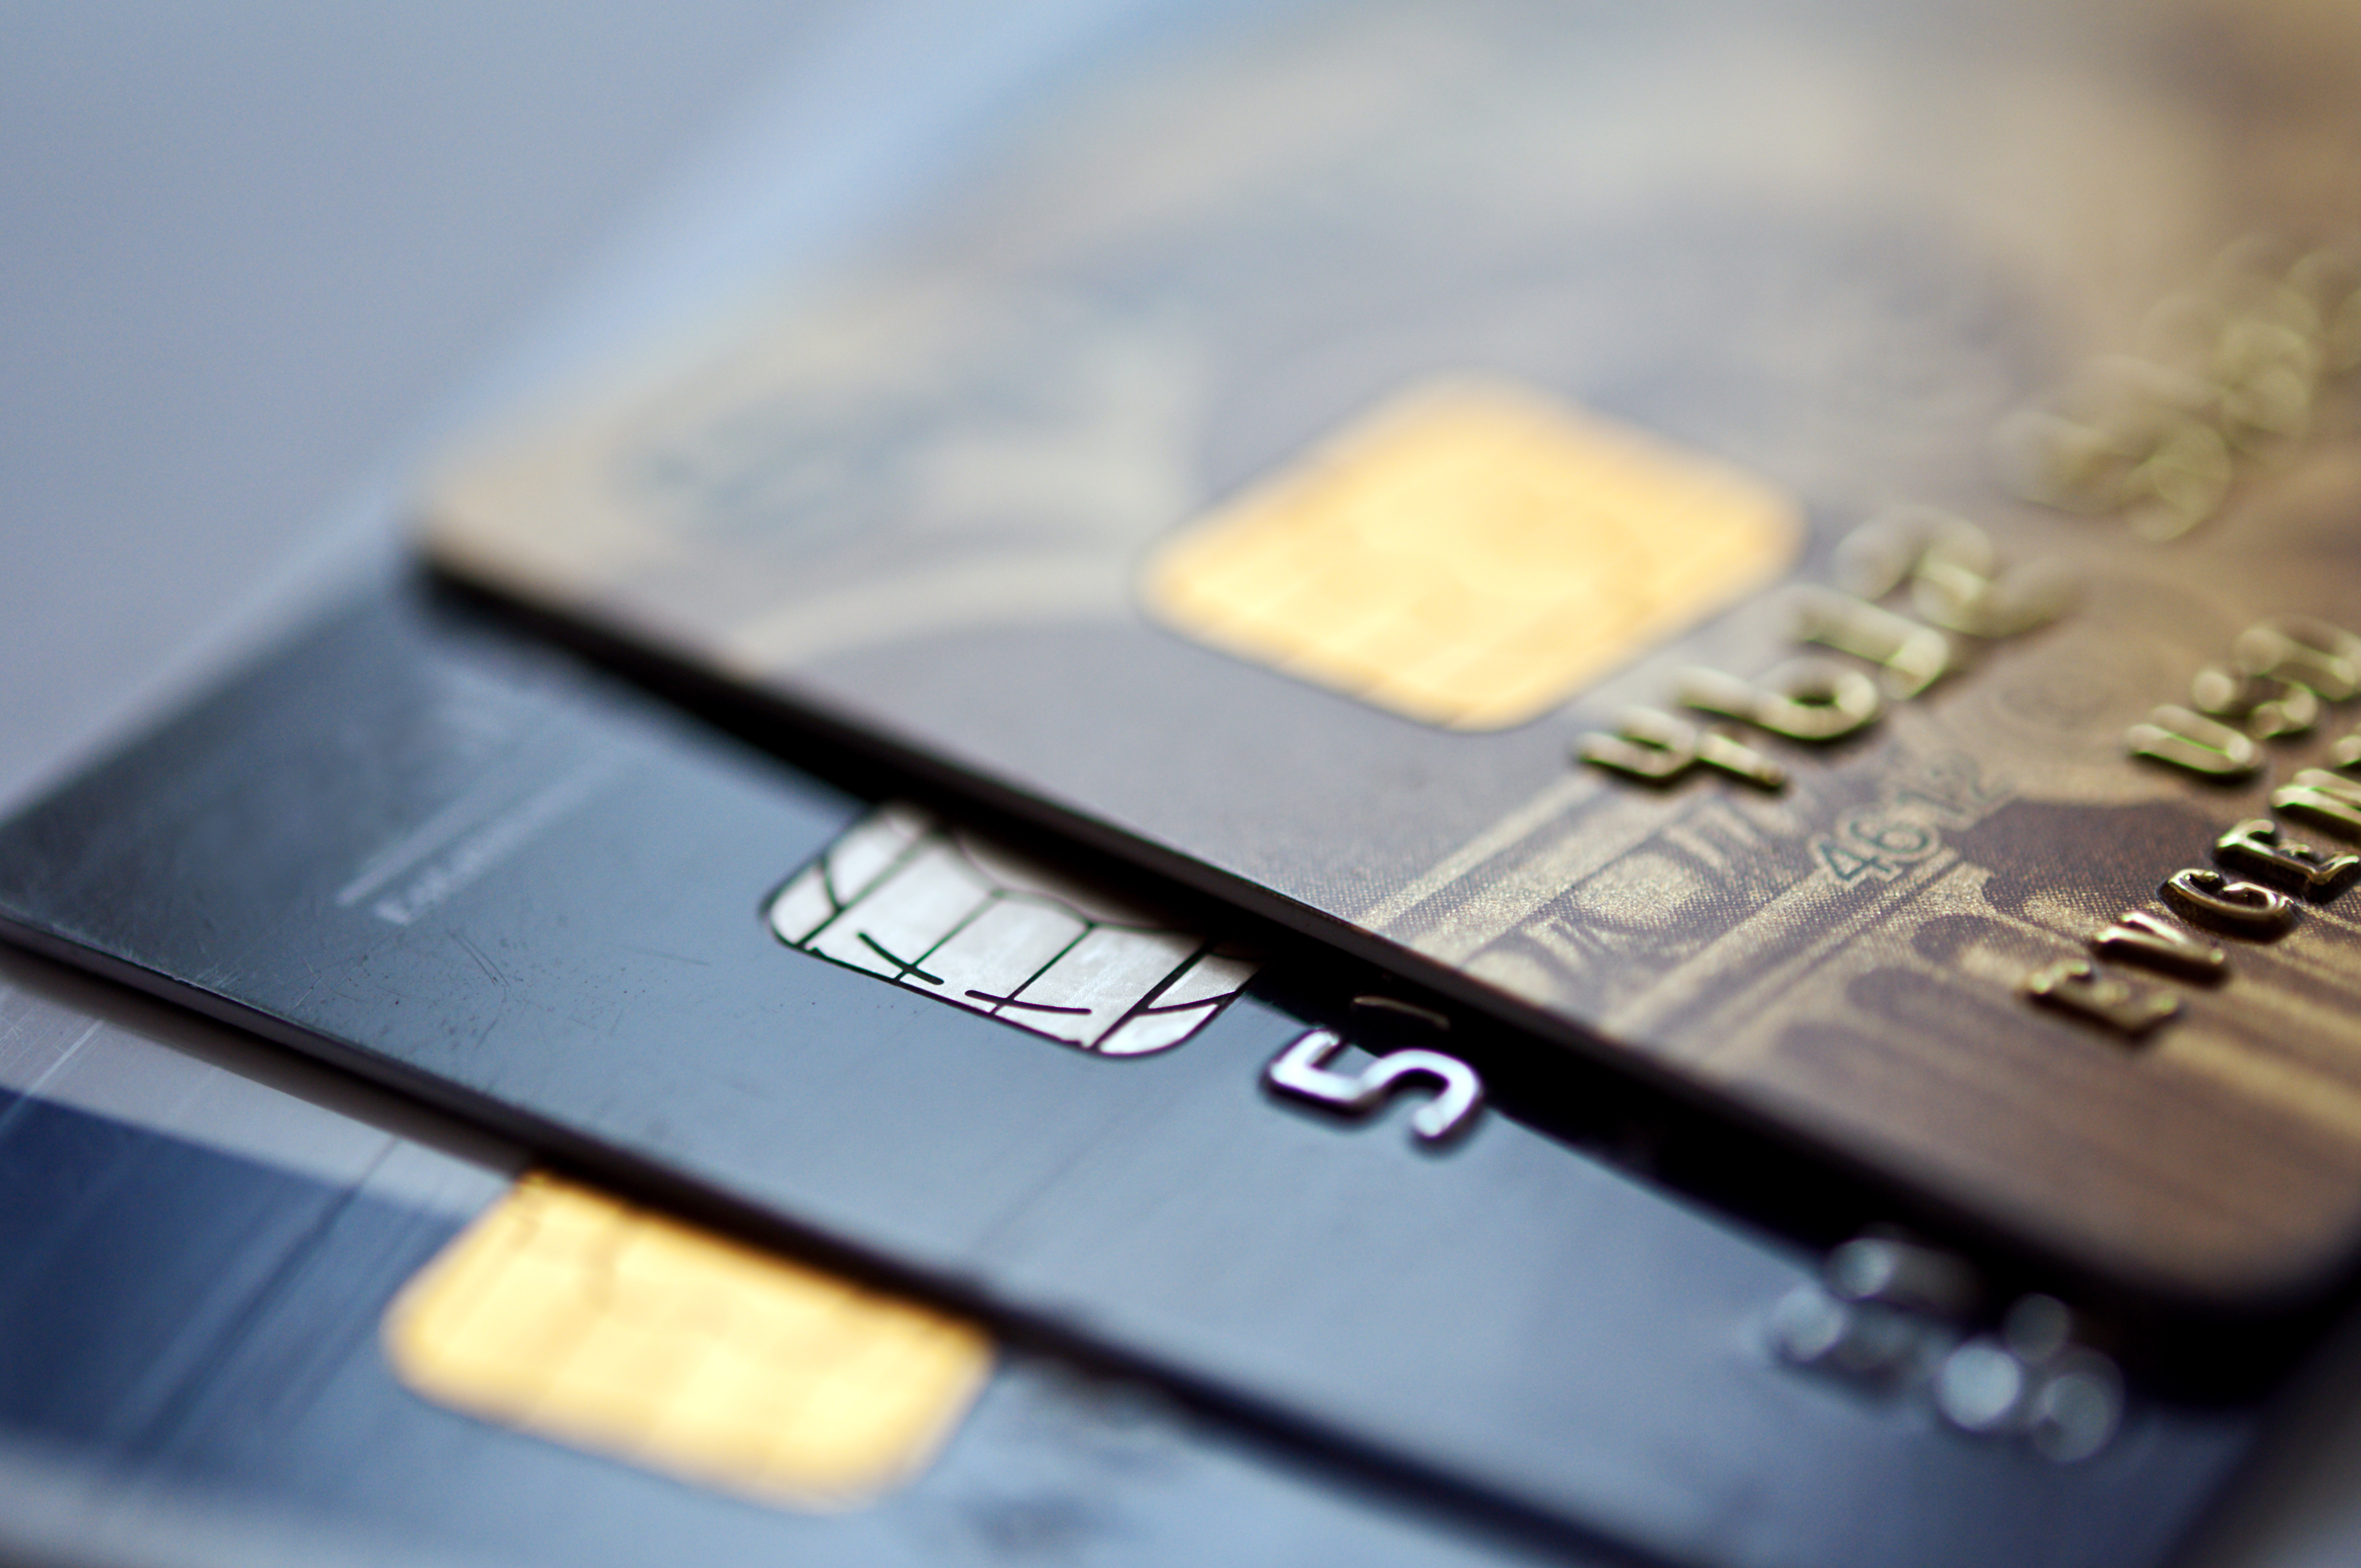 A brief history of the Payment Card Industry